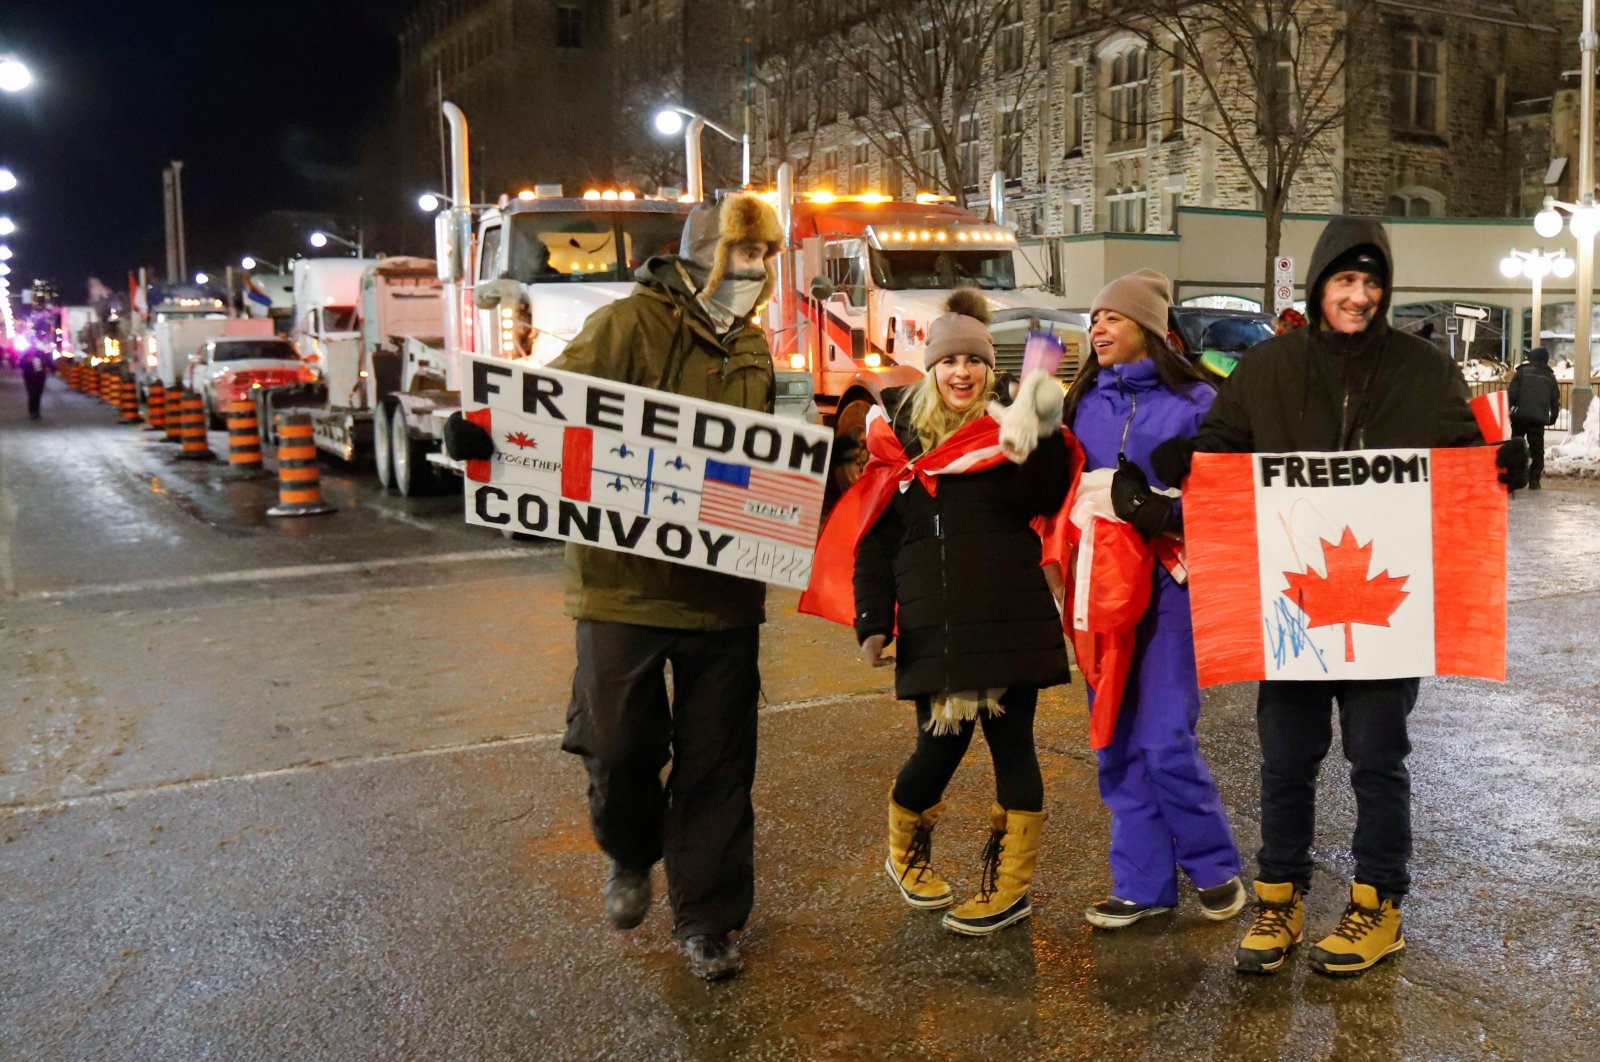 Supporters of a trucker convoy to protest coronavirus disease (COVID-19) vaccine mandates for cross-border truck drivers walk past a row of trucks on Parliament Hill in Ottawa, Ontario, Canada, Jan. 28, 2022. (Reuters File Photo)